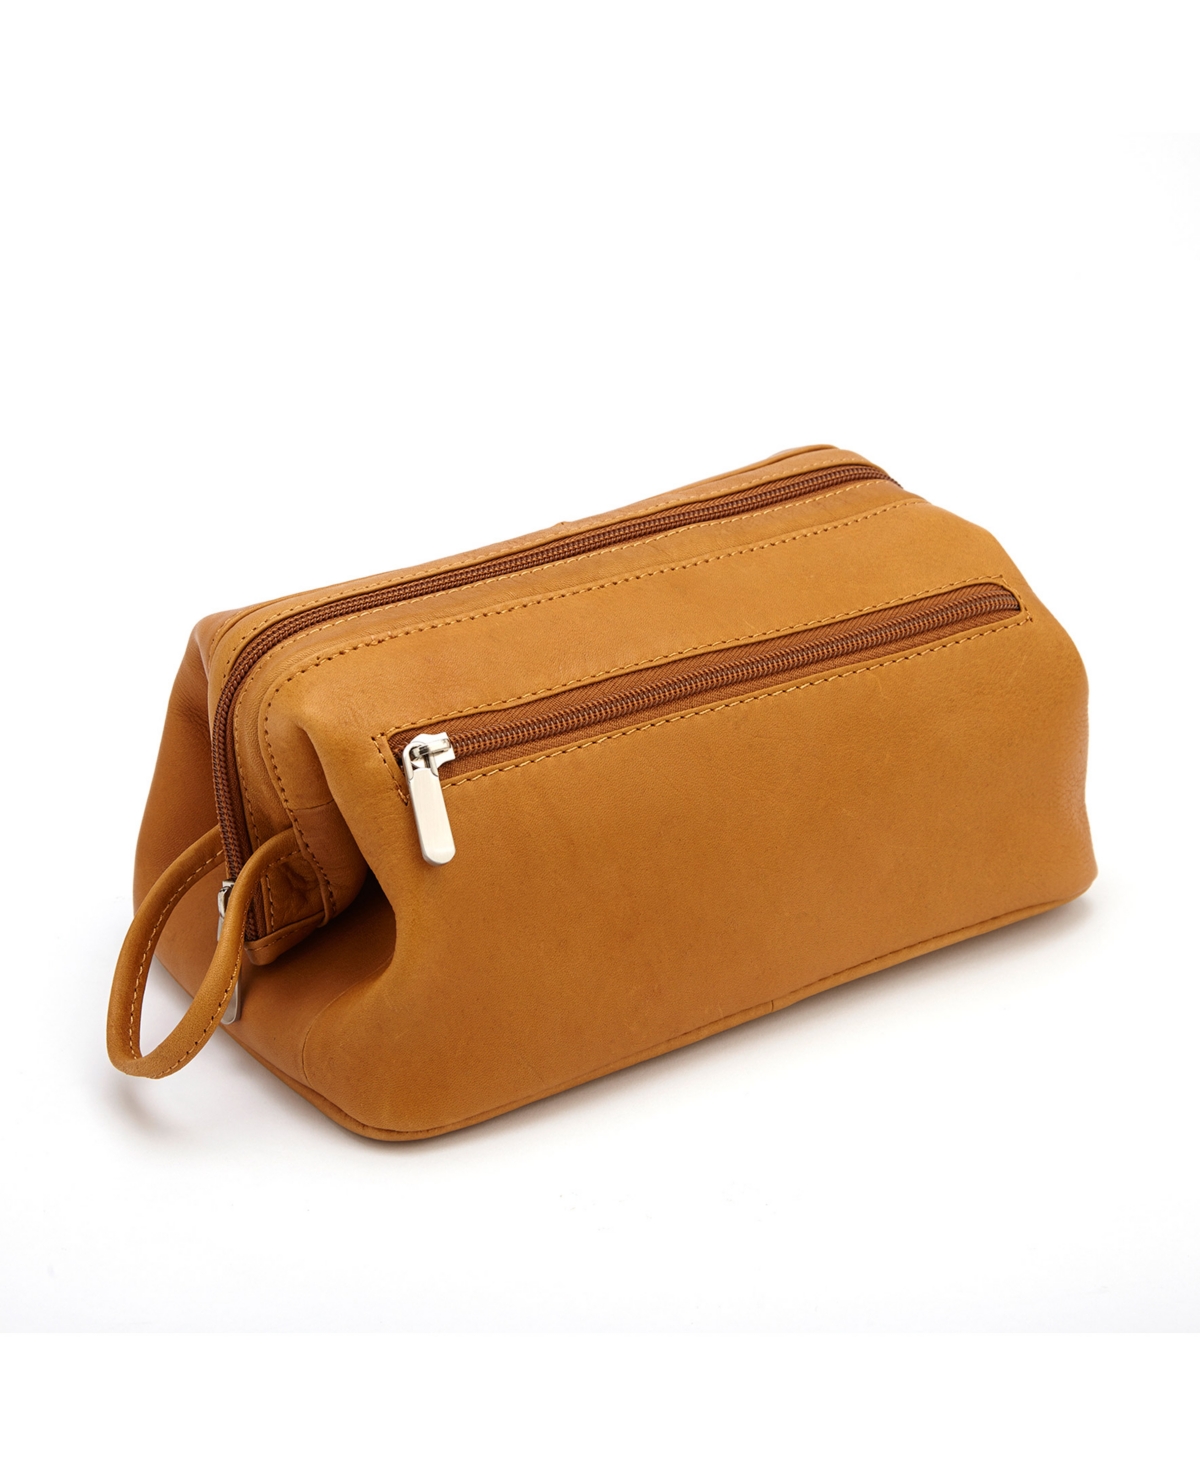 Colombian Leather Toiletry Bag - Tan